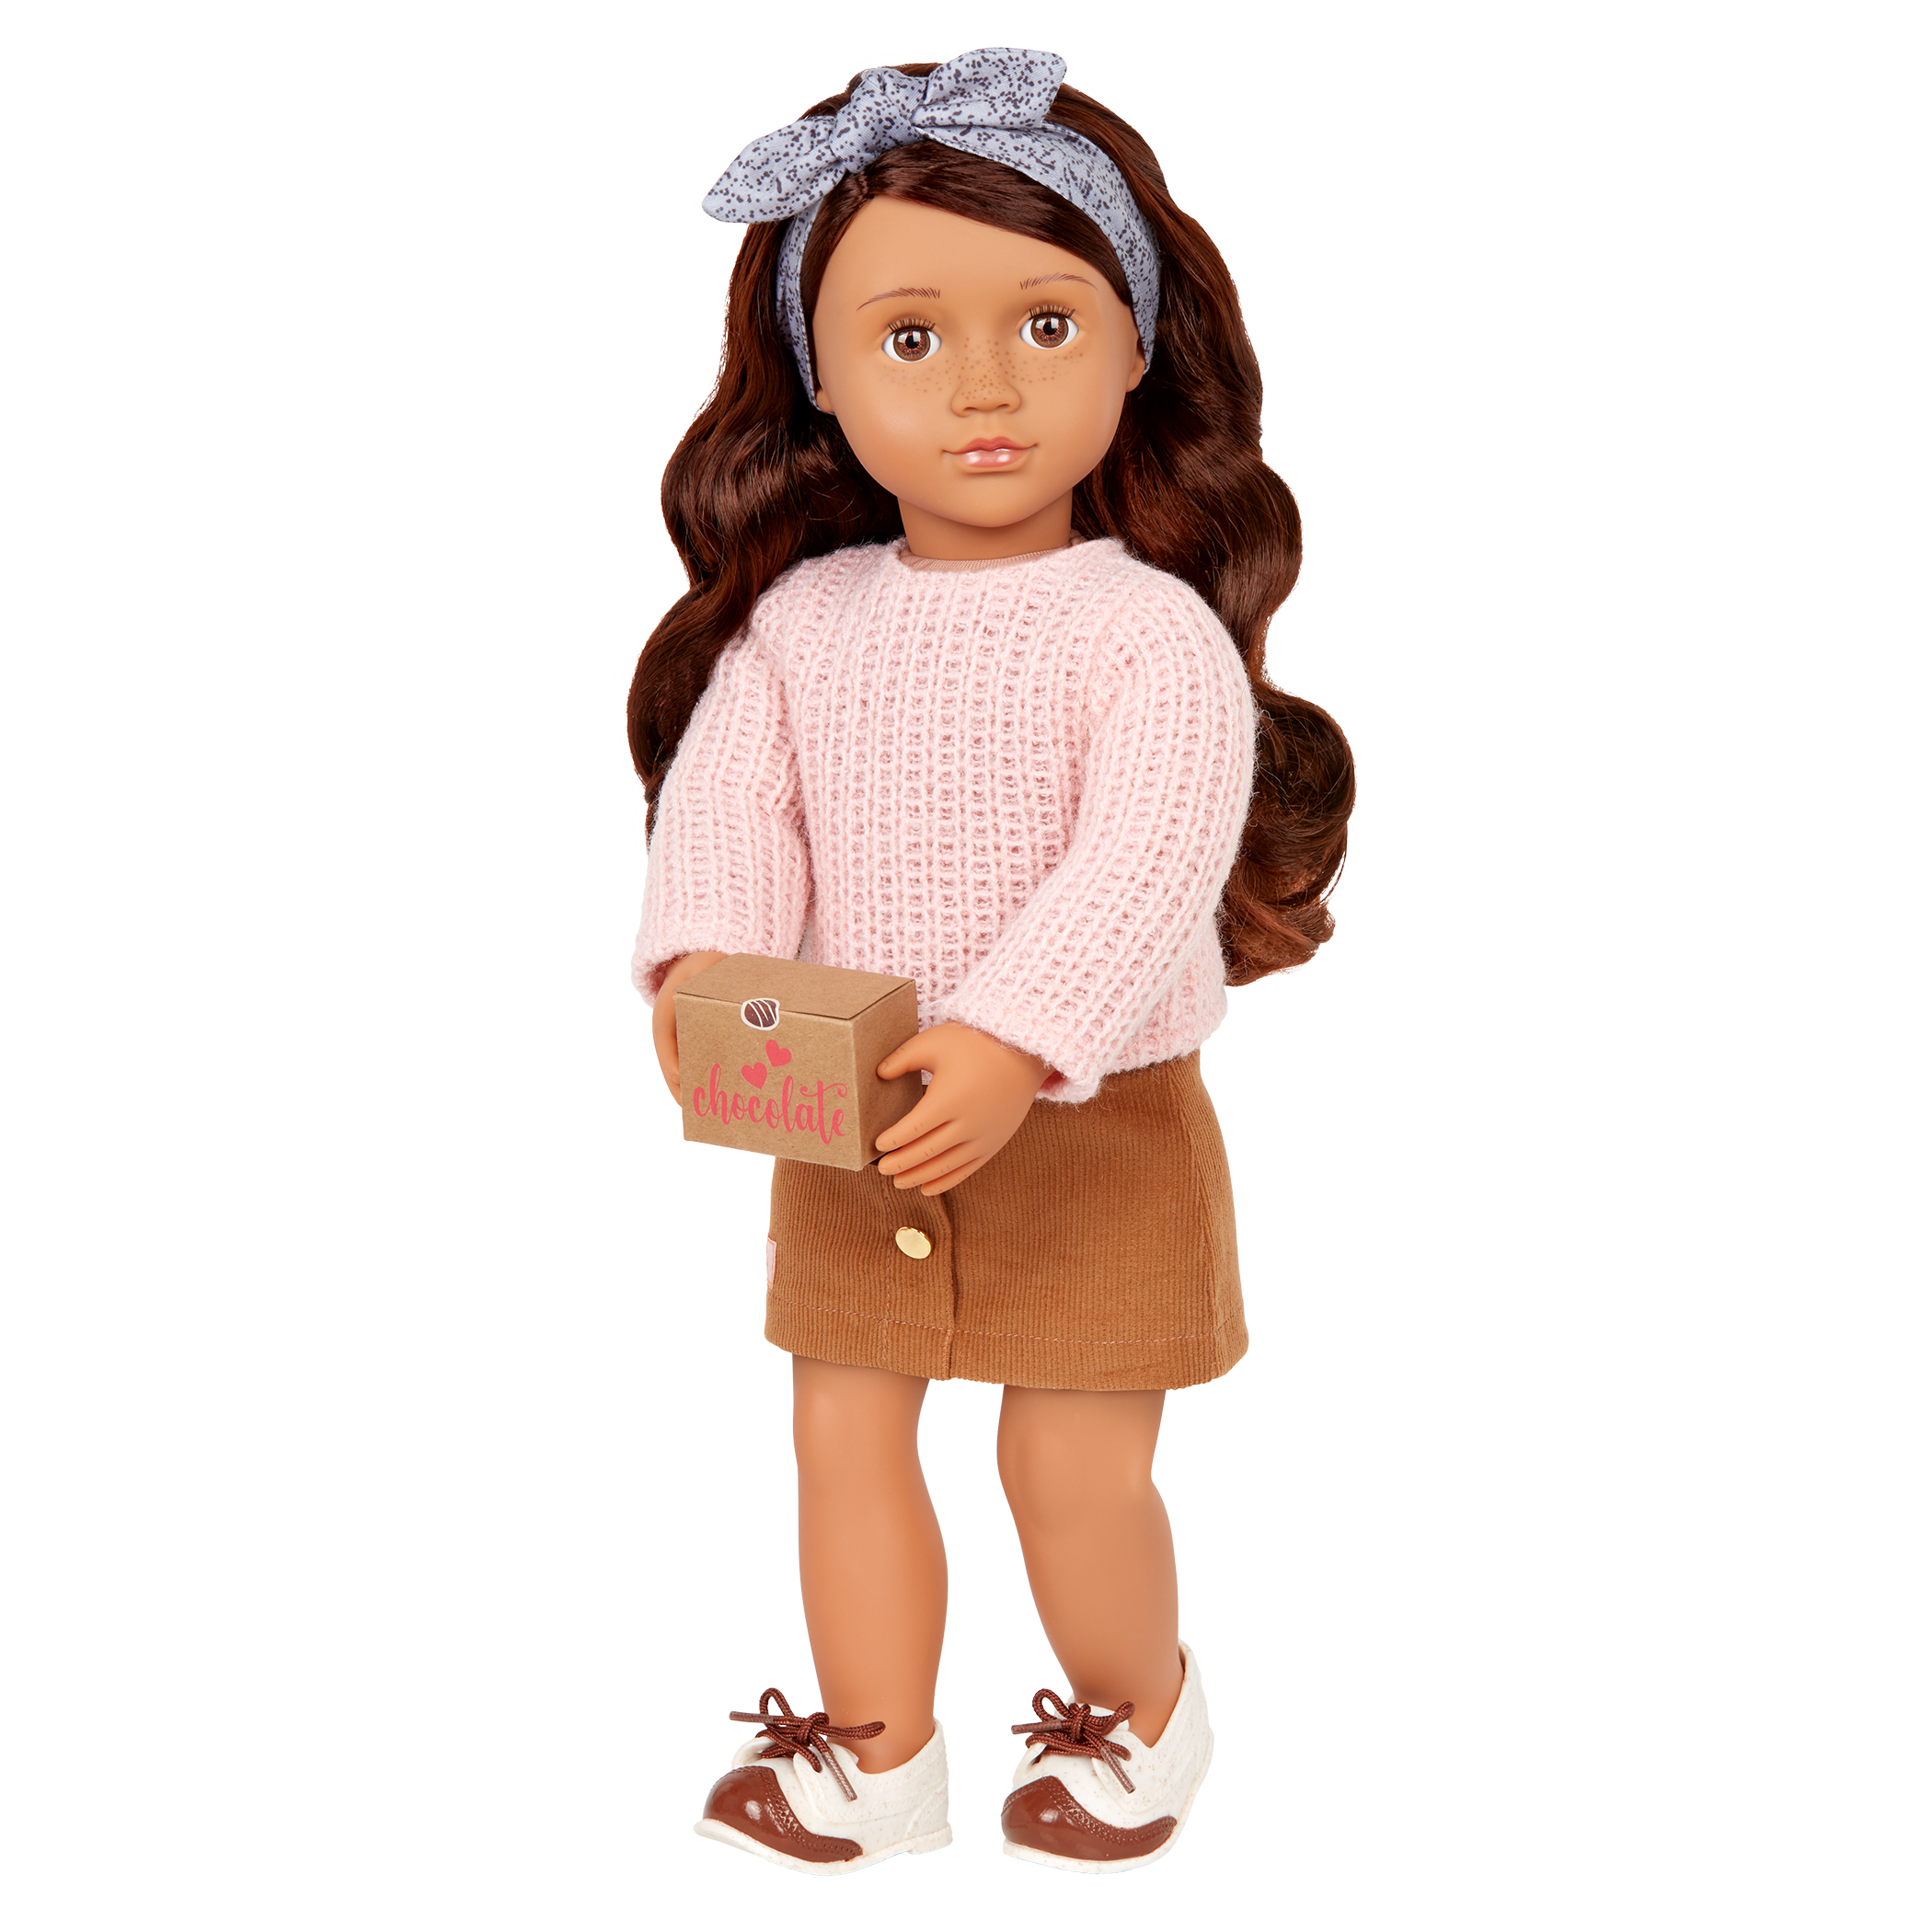 Our Generation Posable 18-inch Baker Doll Coco & Storybook